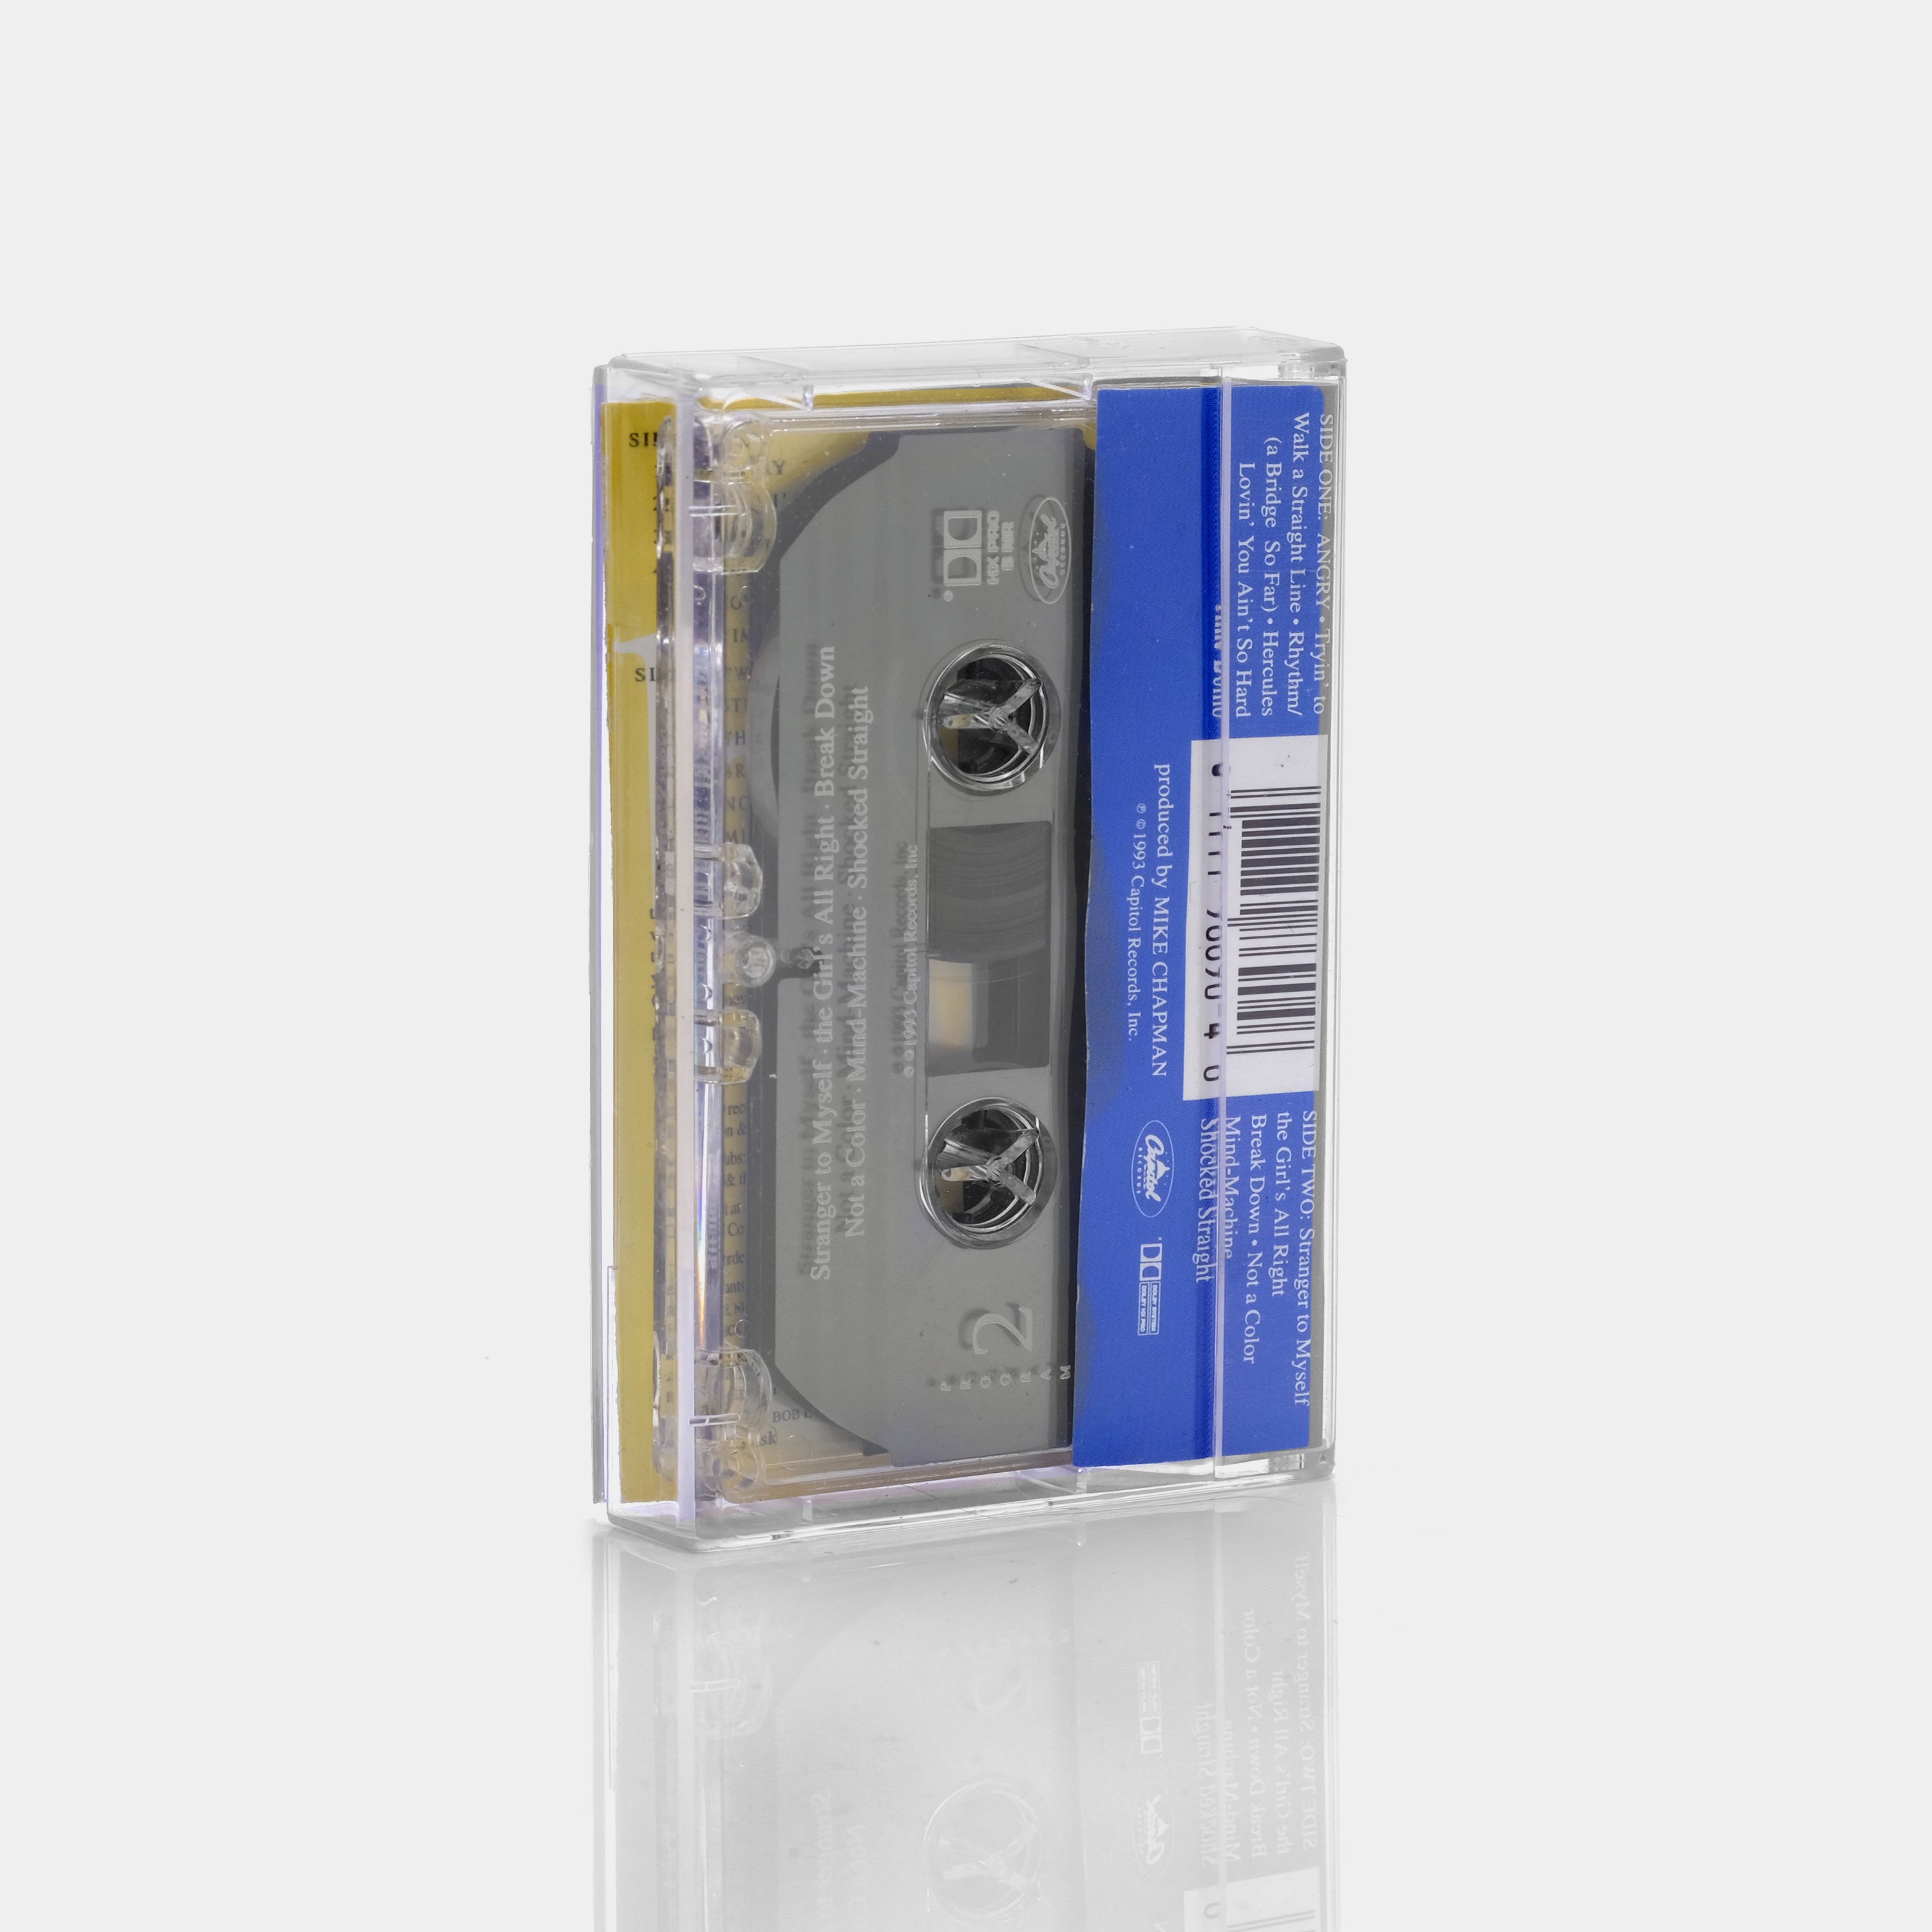 Billy Squier - Tell The Truth Cassette Tape